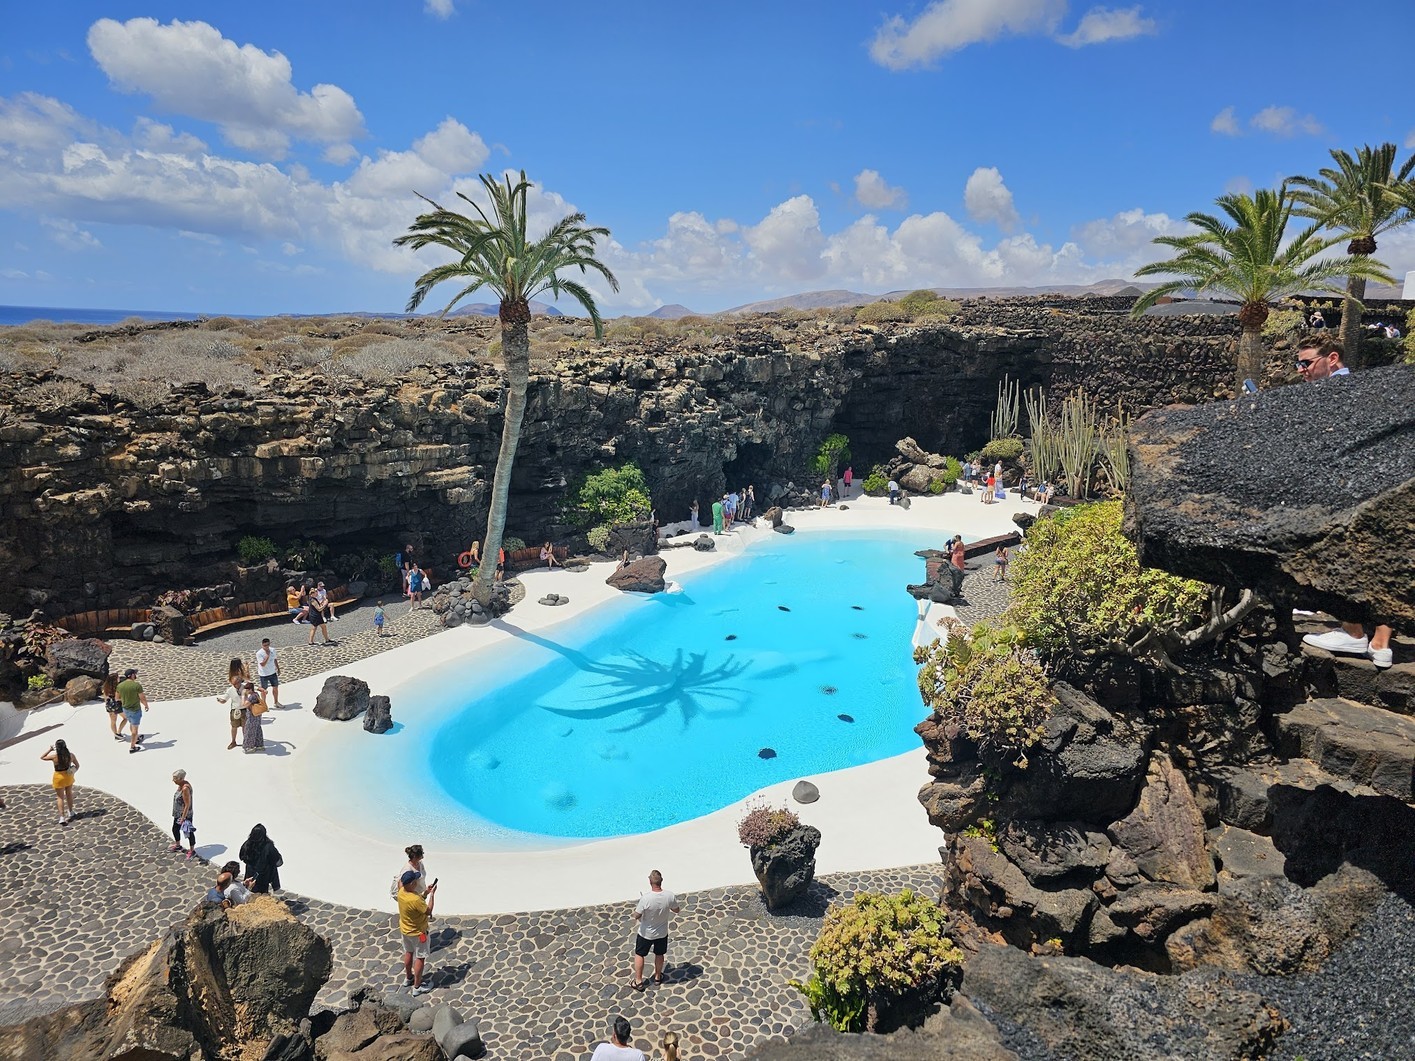 Jameo Grande is where you can see the Jameos del Agua’s pool